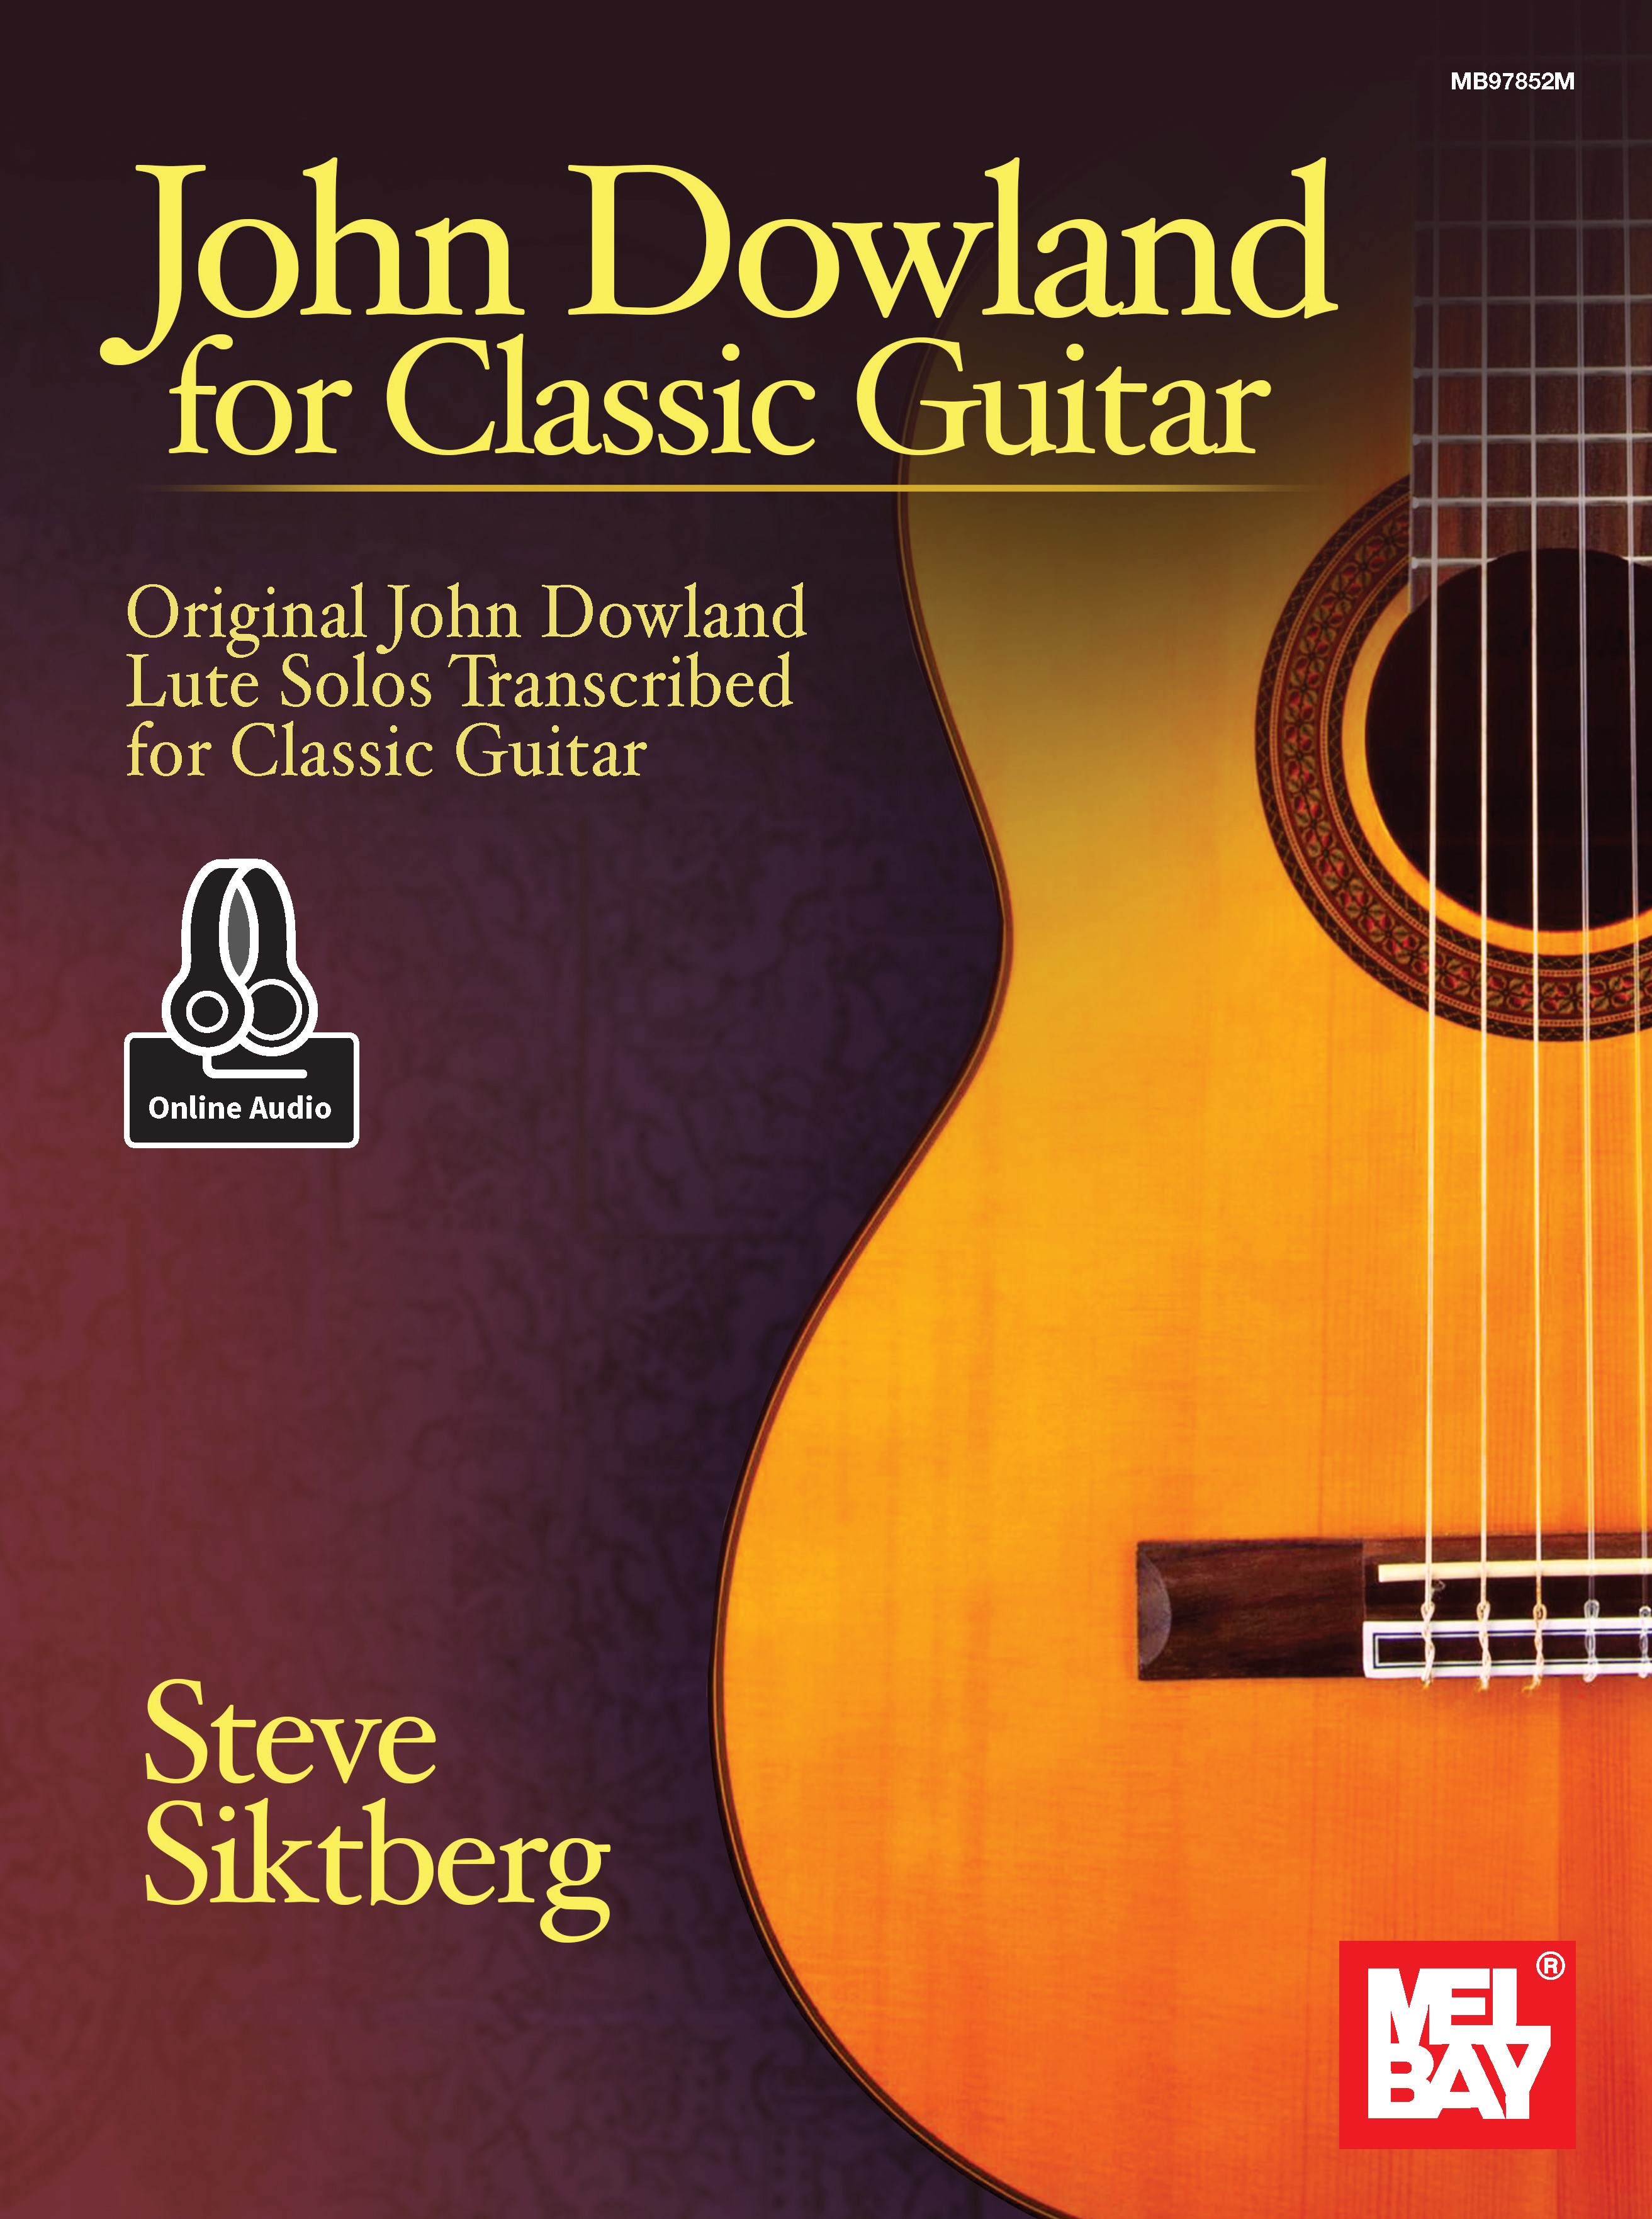 For Classic Guitar